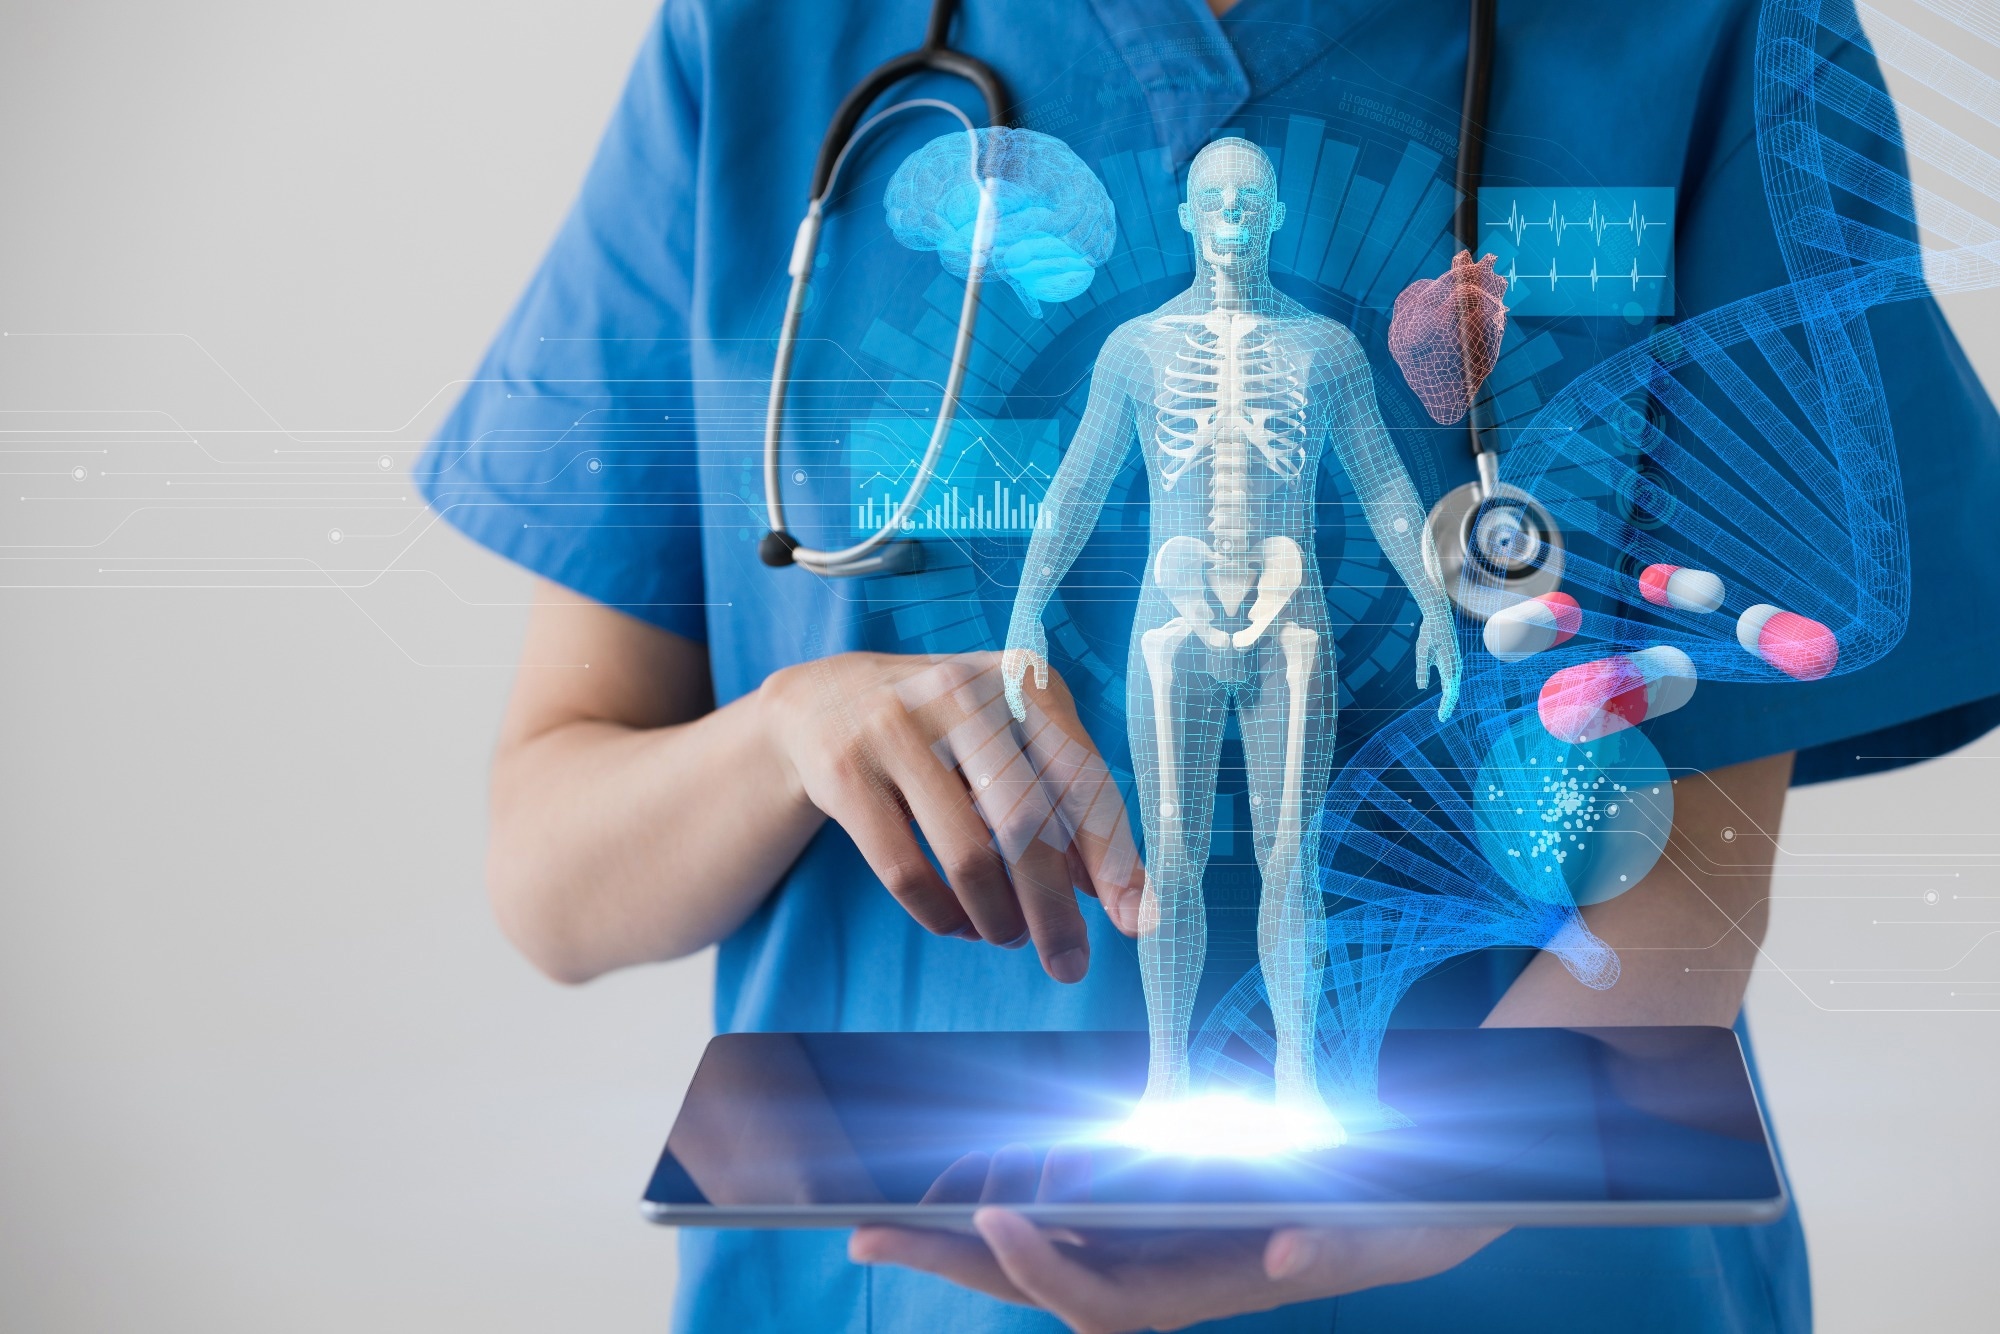 Study: Randomized Controlled Trials Evaluating AI in Clinical Practice: A Scoping Evaluation. Image Credit: metamorworks/Shutterstock.com